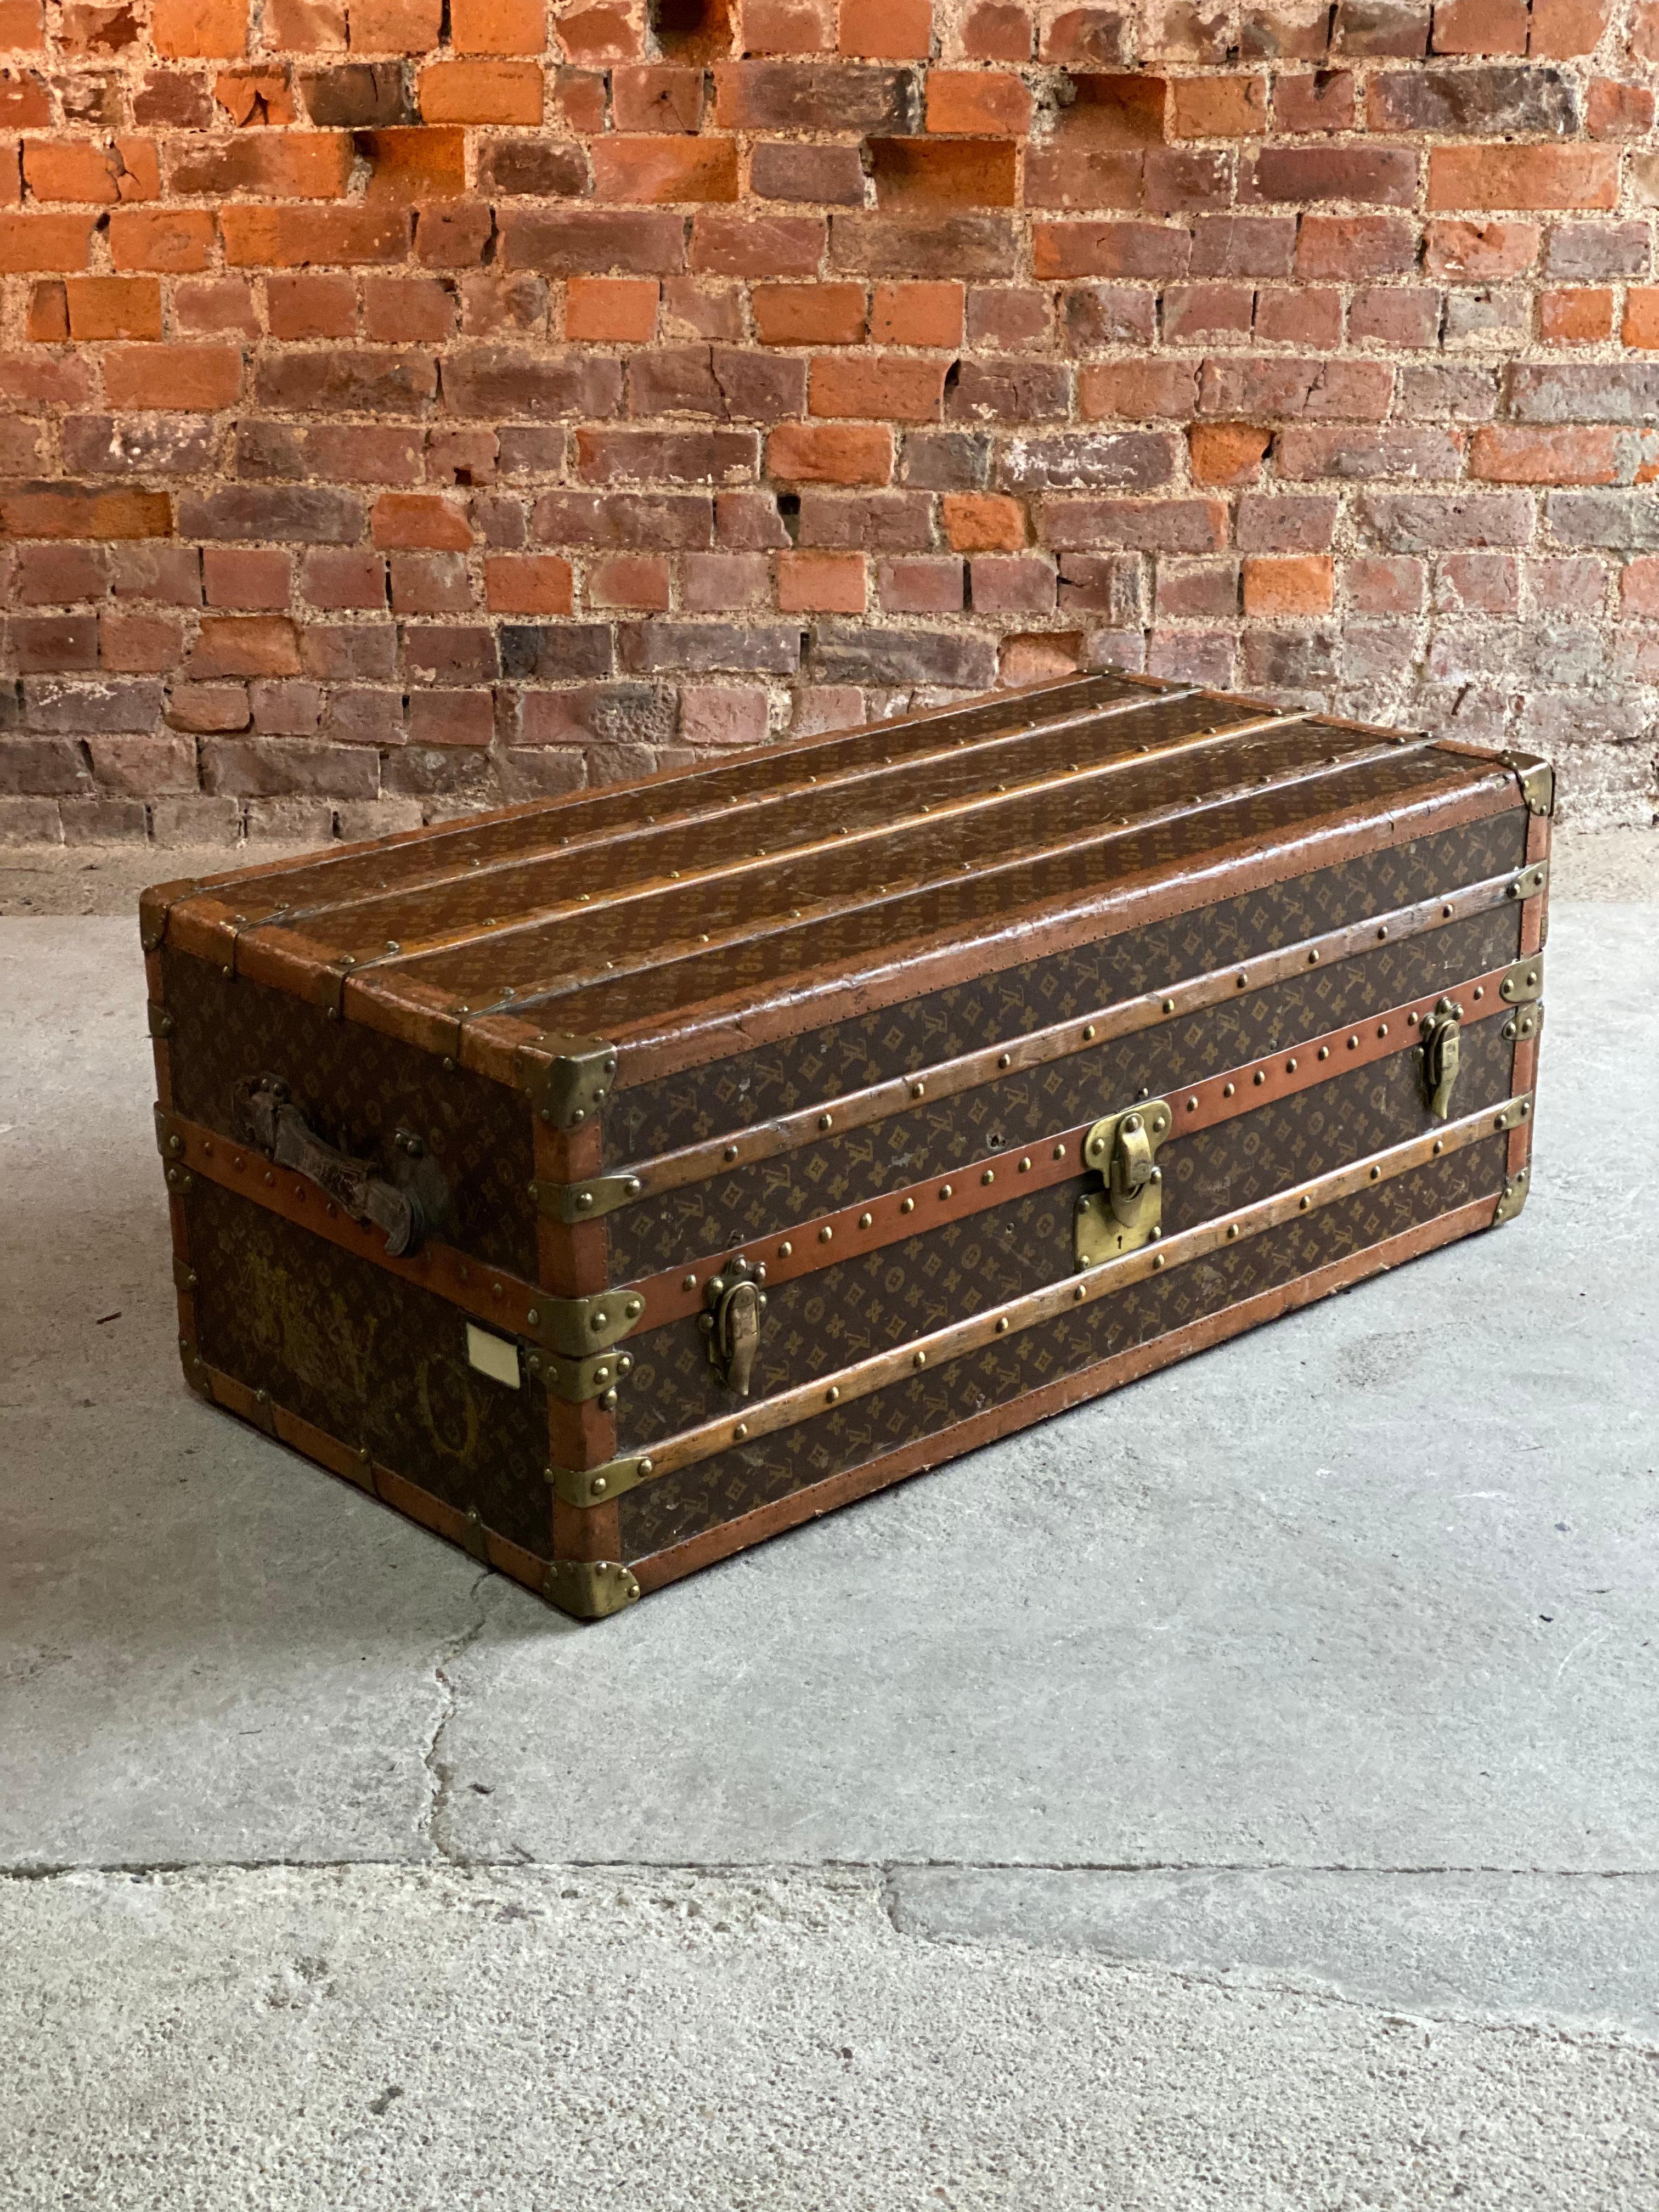 Louis Vuitton steamer trunk wardrobe trunk chest France circa 1920

Louis Vuitton wardrobe steamer trunk, early 20th century circa 1920, with brass and leather edges, with hanging space and four stamped hangers with a ratchetted rail, with five